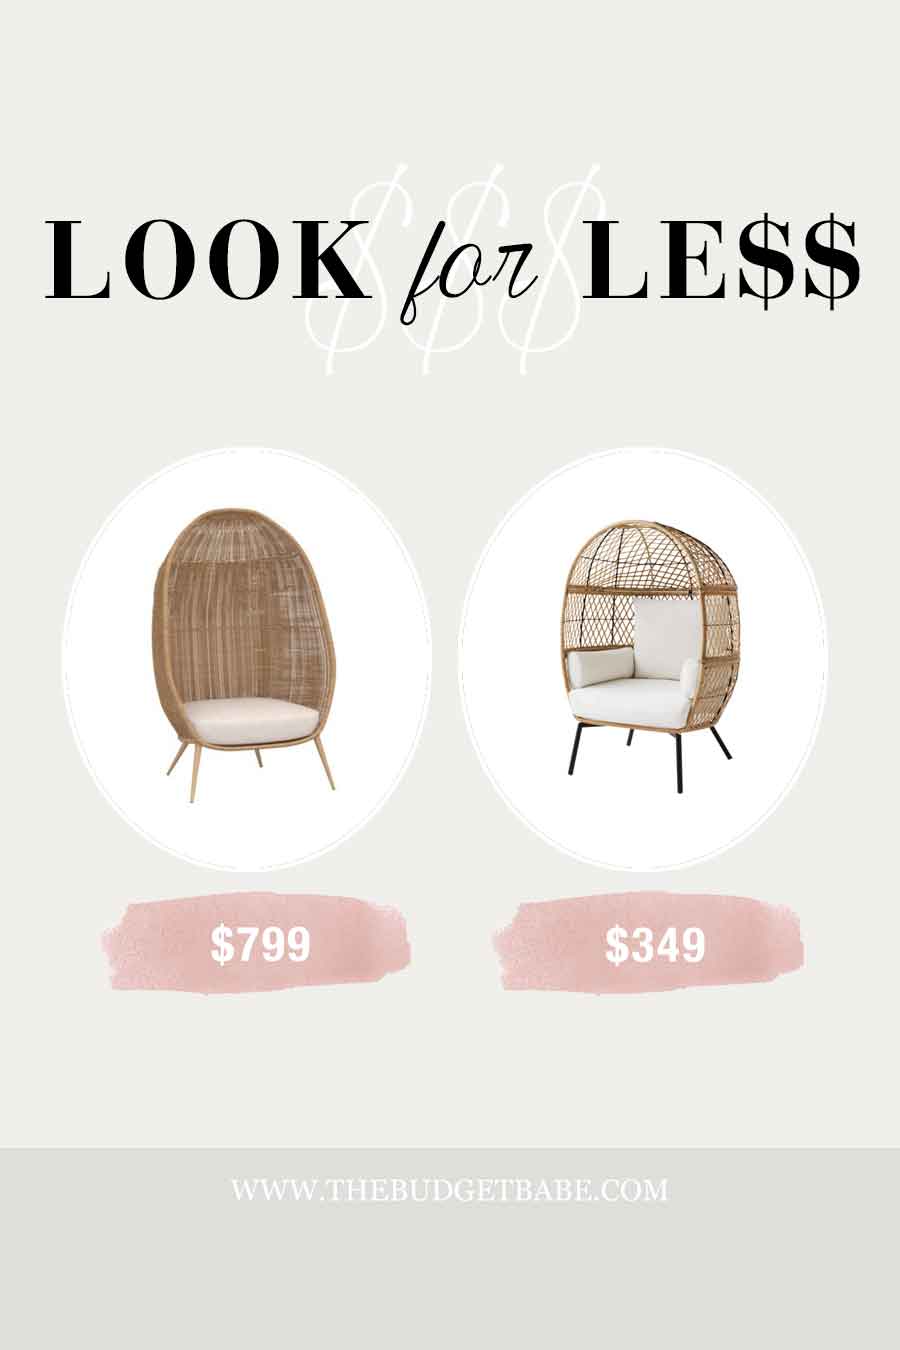 Pottery Barn Woven Cave Chair Look for Less at Walmart